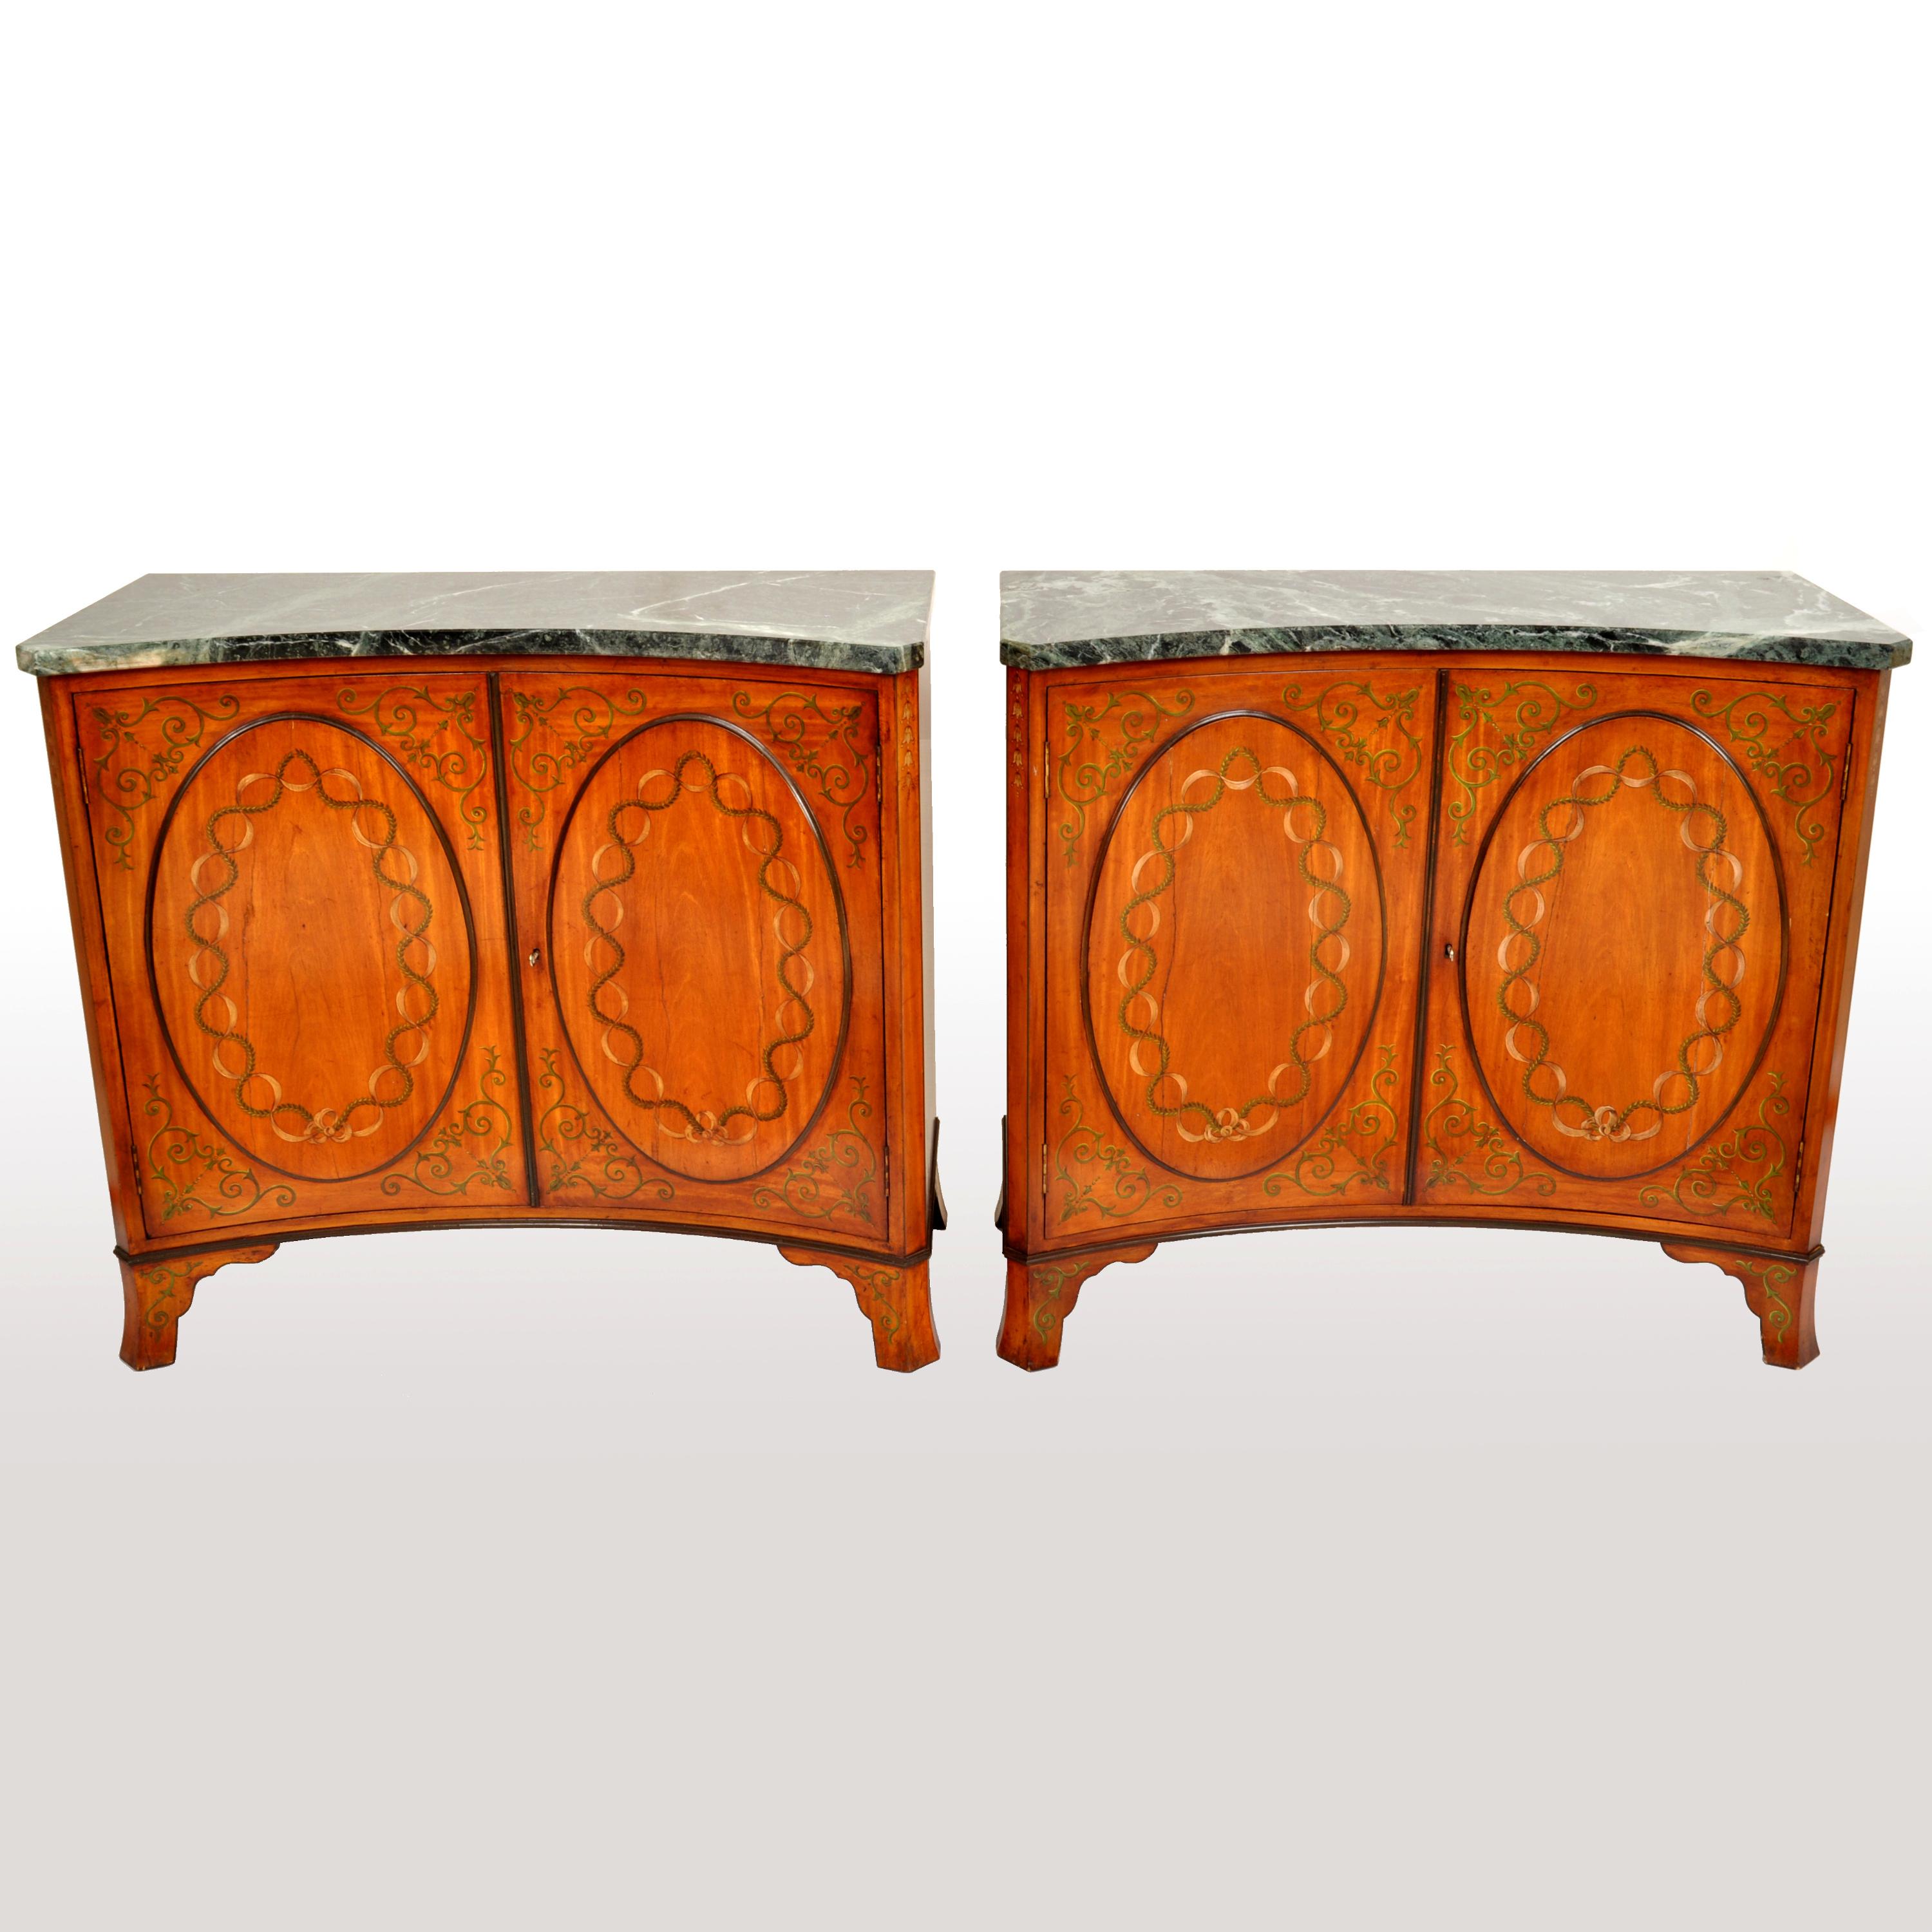 A pair of fine & rare antique Adam Revival satinwood & marble top side cabinets, circa 1880.
The cabinets of concave form and having green & white variegated marble tops, each cabinet with twin doors with oval paterae having painted decoration and